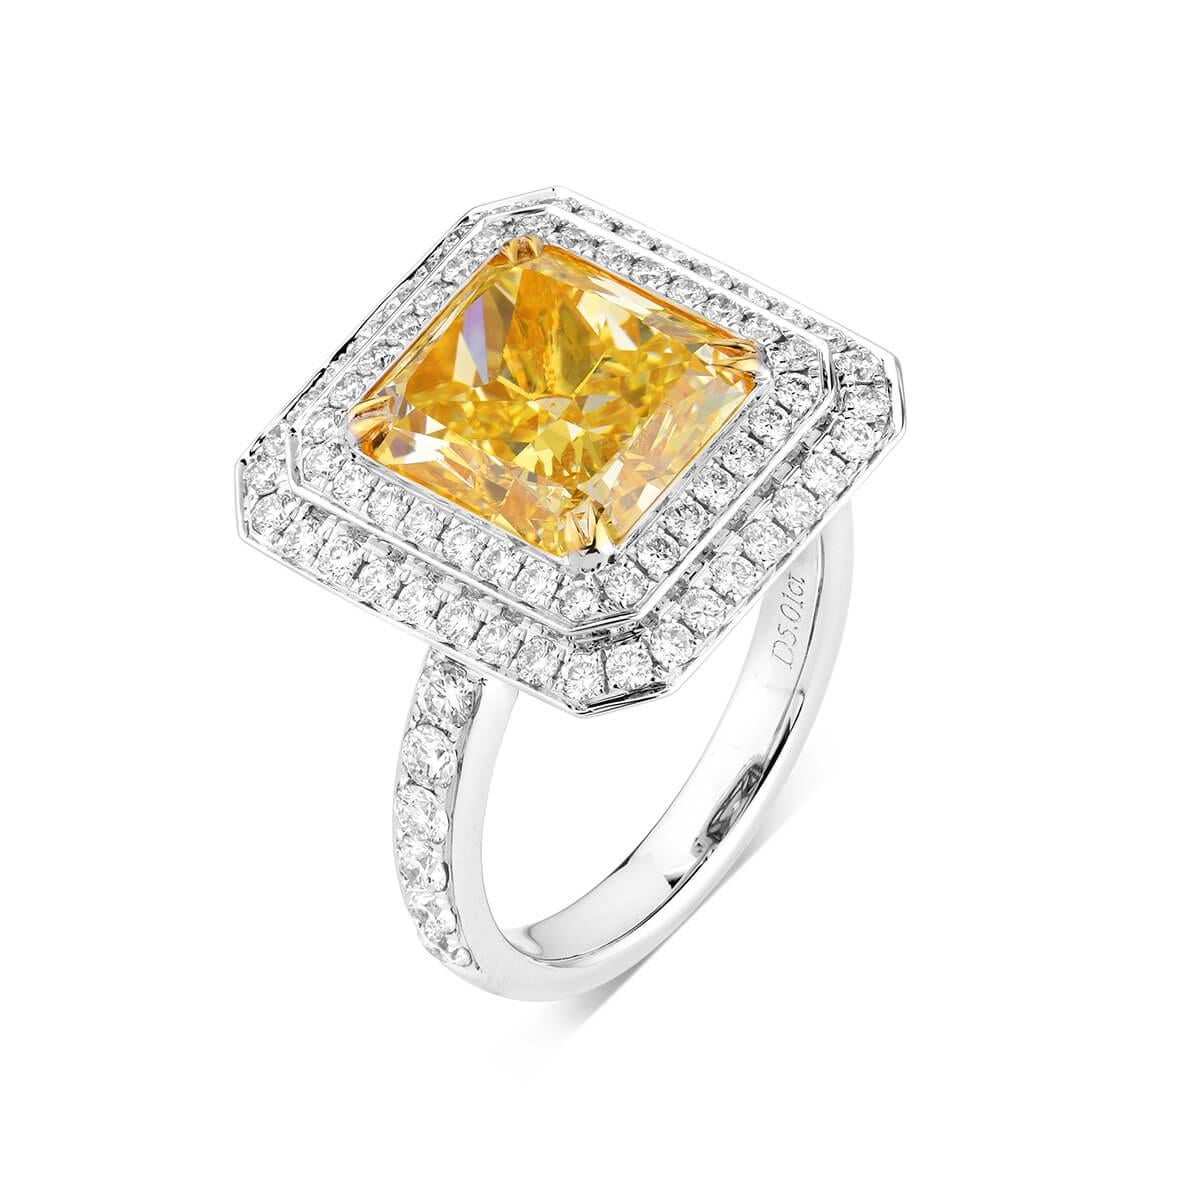 WHITE GOLD RADIANT CUT YELLOW DIAMOND RING - 6.01 CT


Set in 18K White Gold


Total yellow diamond weight: 5.01 ct
[ 1 diamond ]
Color: Y-Z
Clarity: VS2

Total white diamond weight: 1.00 ct
[ 78 diamonds ]
Color: G-H
Clarity: VS

Total ring weight: